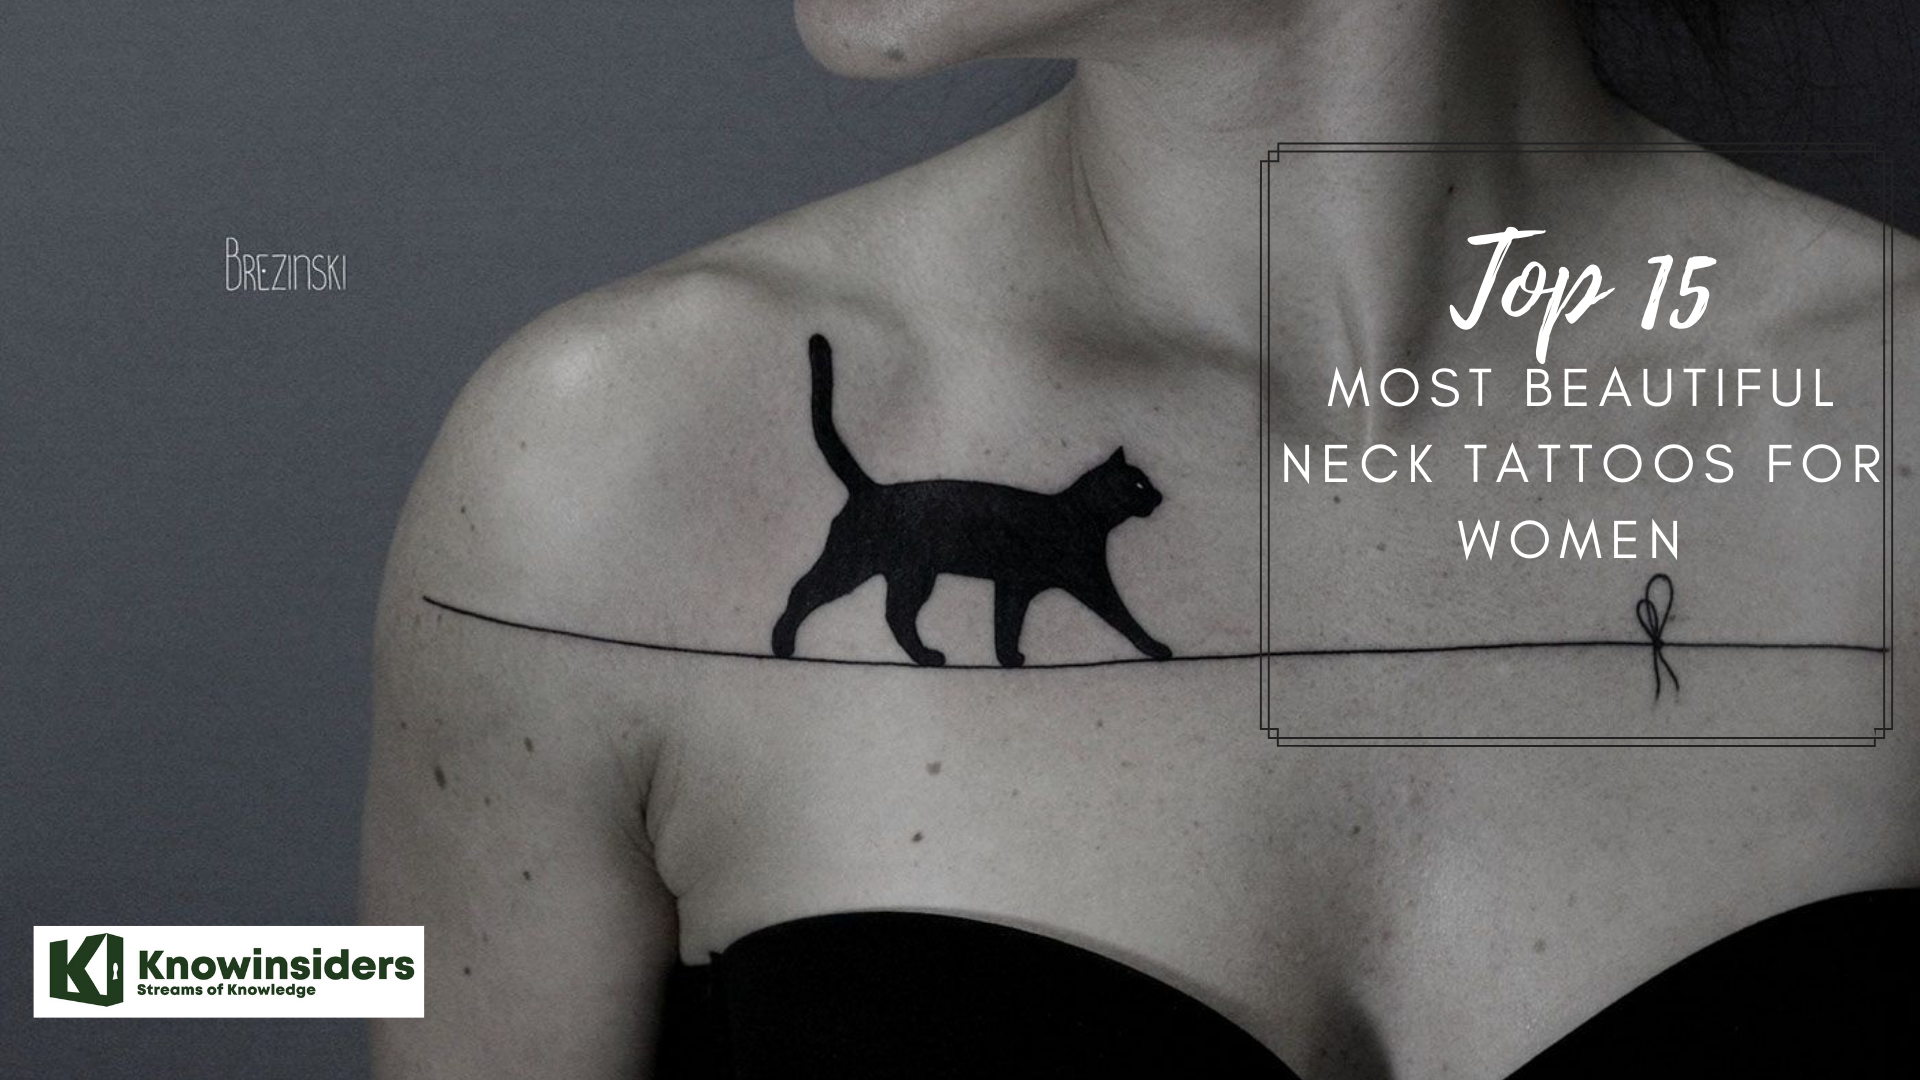 Top 15 most beautiful neck tattoos for women 